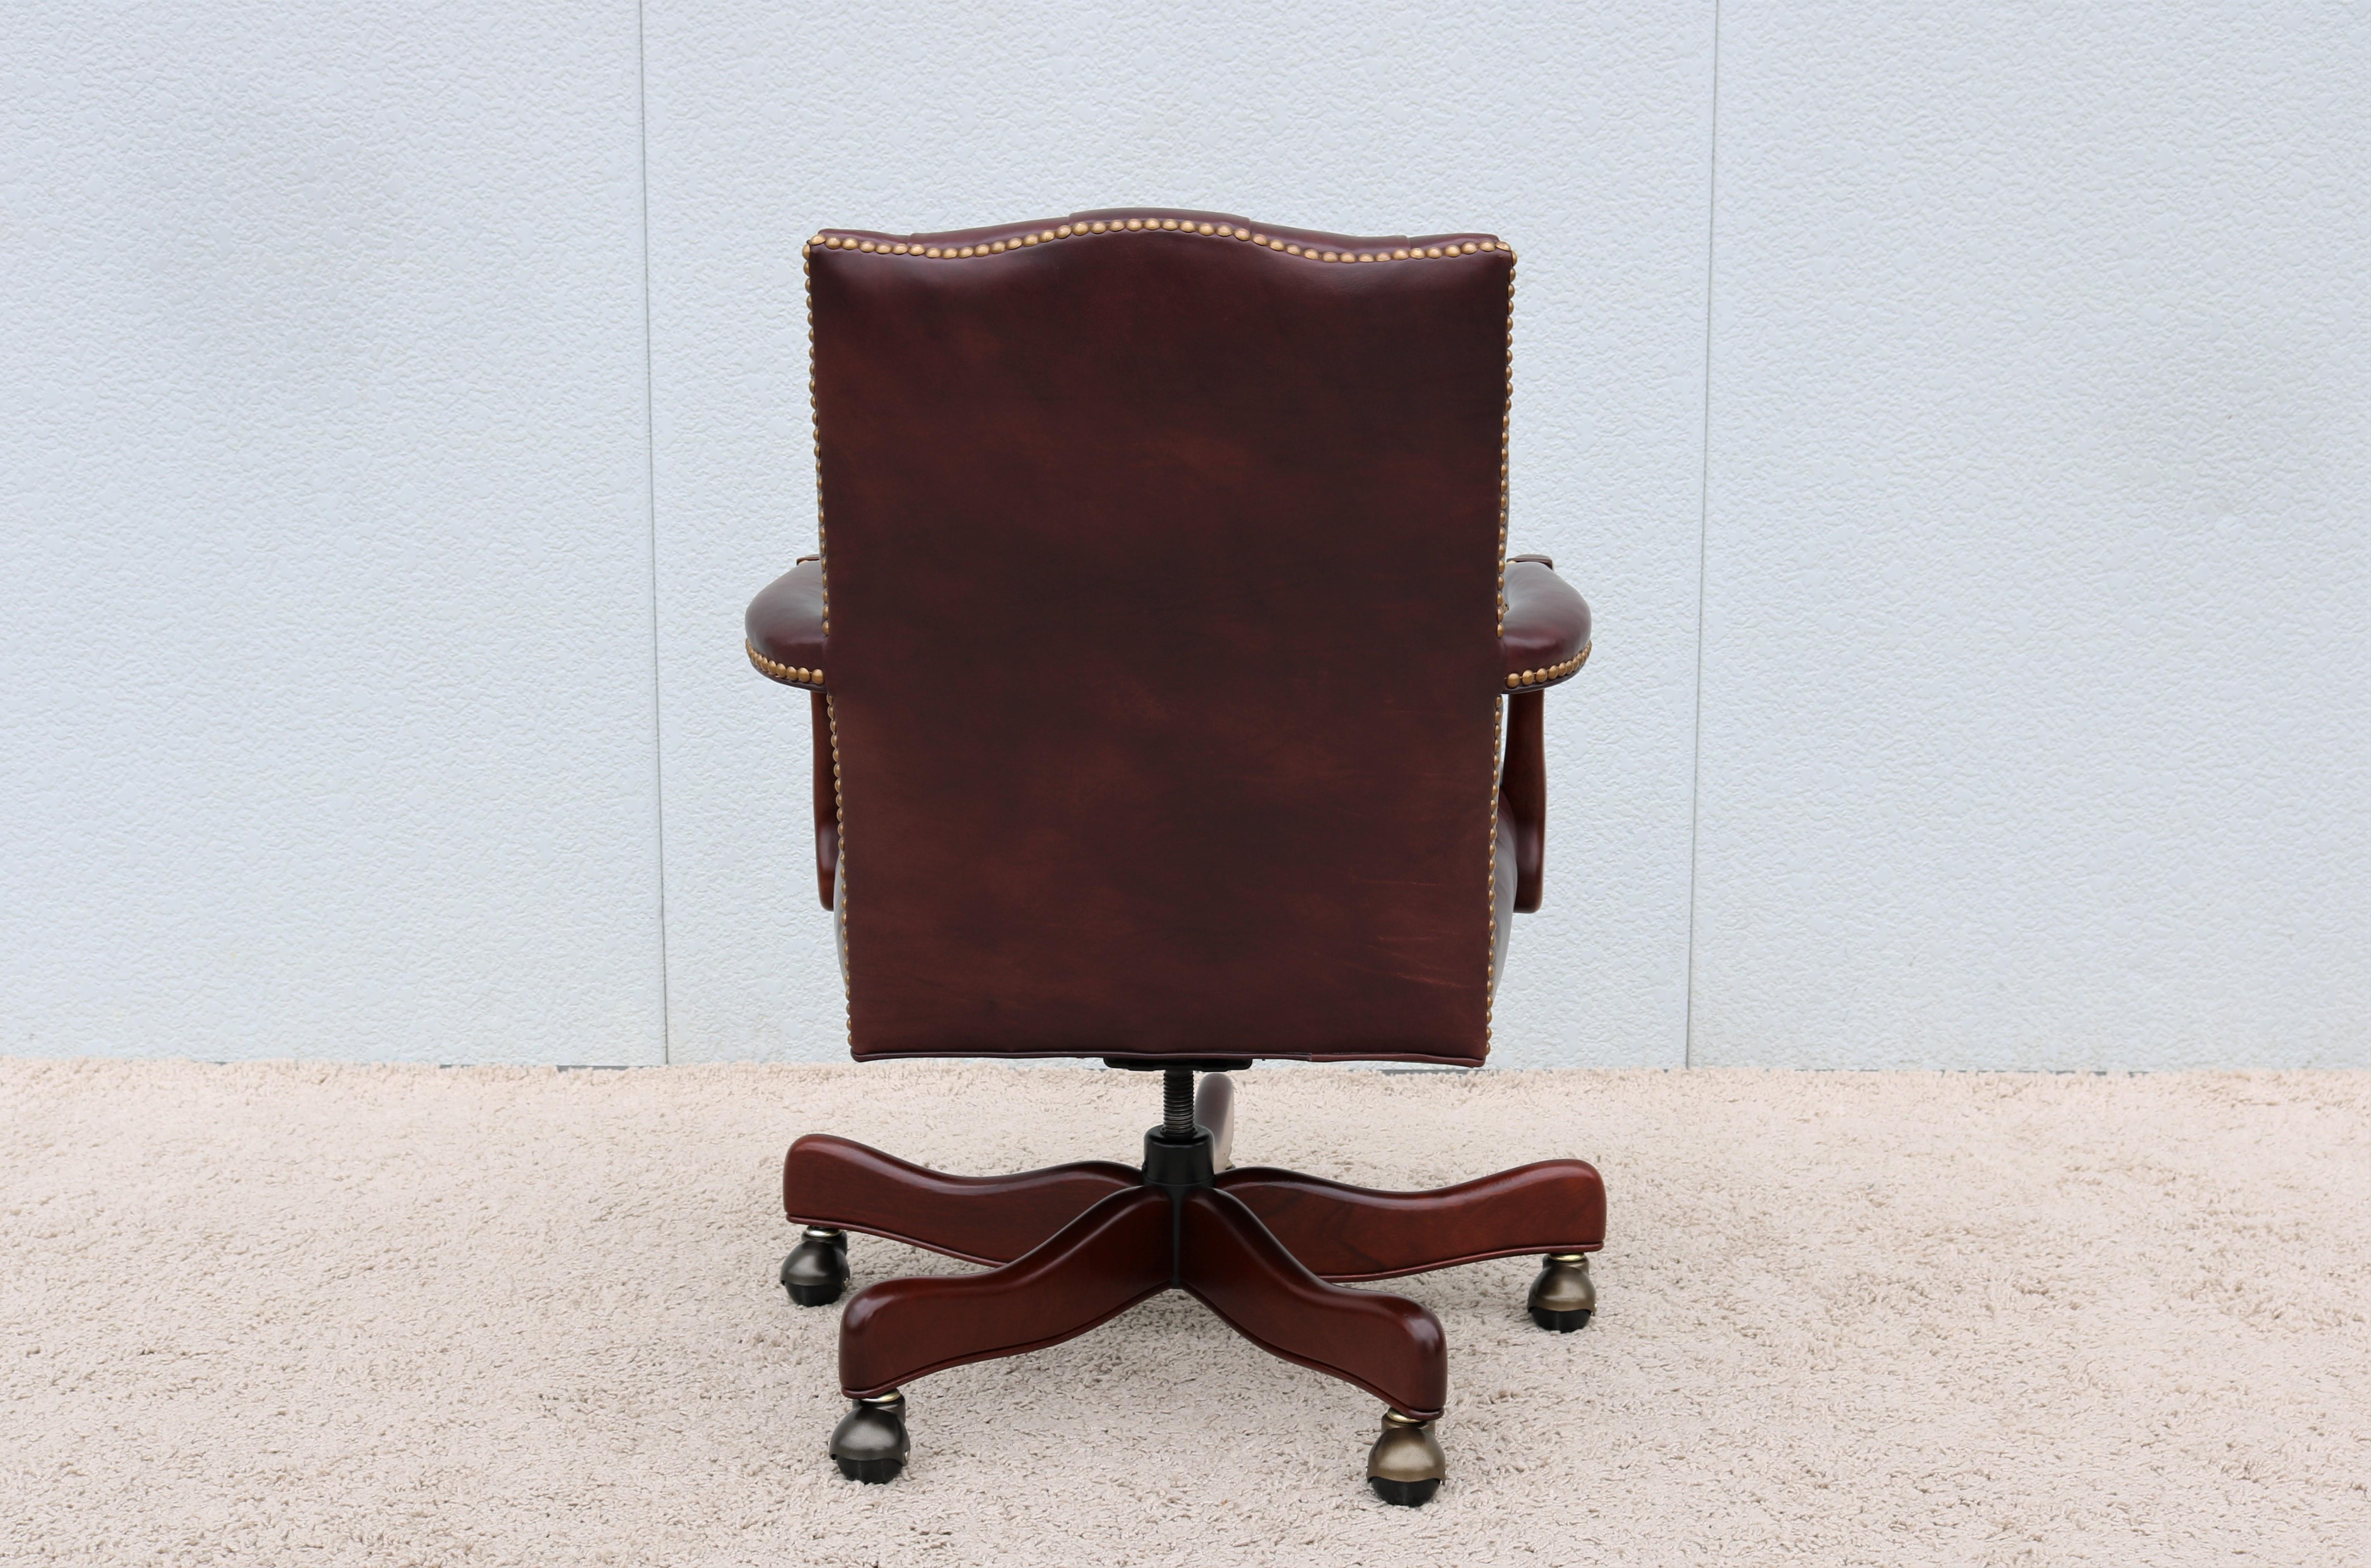 Chesterfield Classic Cabot Wrenn Graham Tufted Burgundy Leather Executive Swivel Desk Chair For Sale